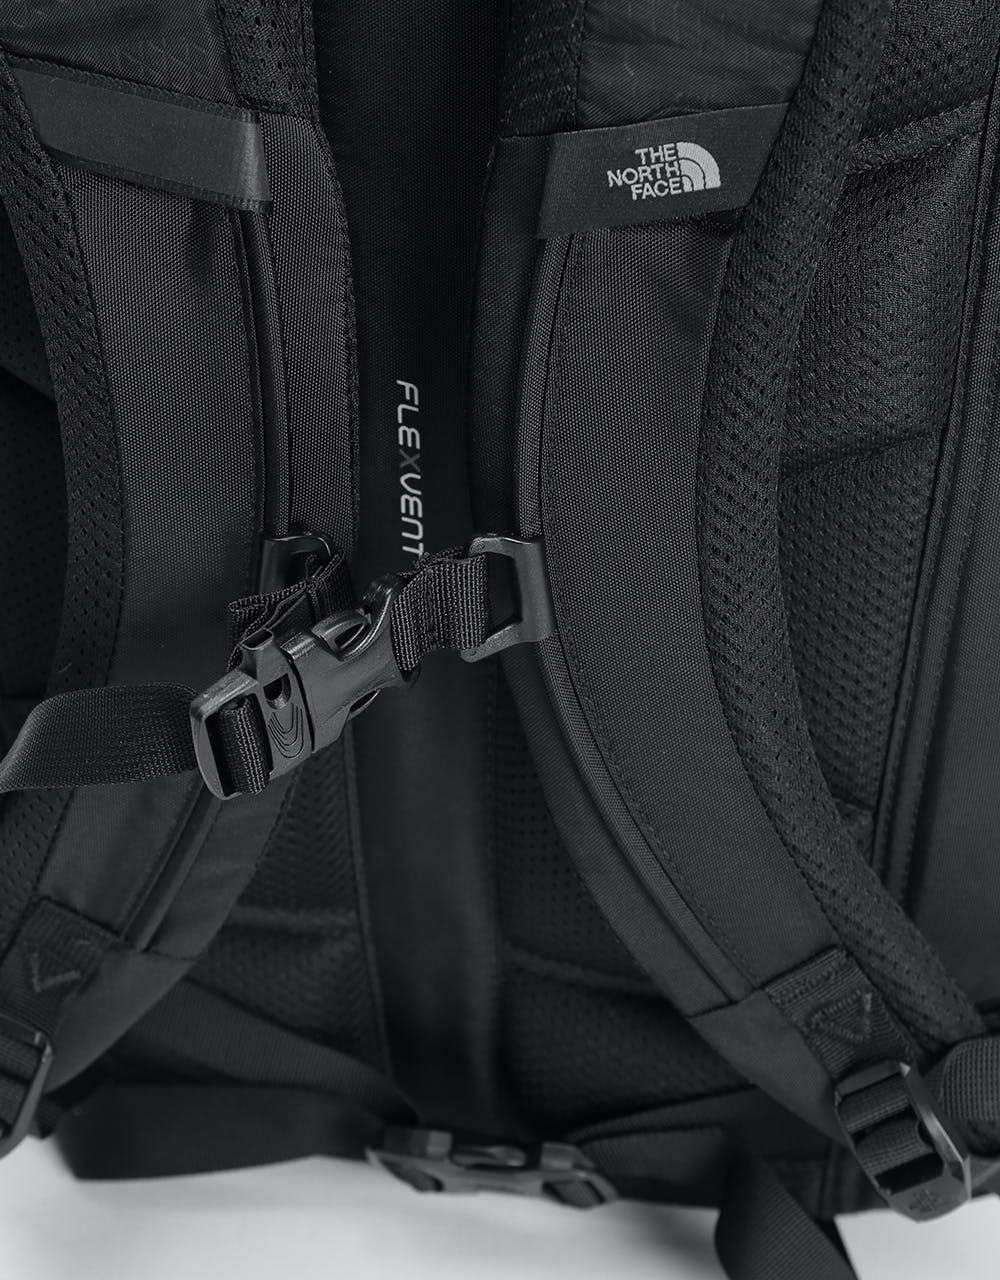 The North Face Recon Backpack - TNF Black